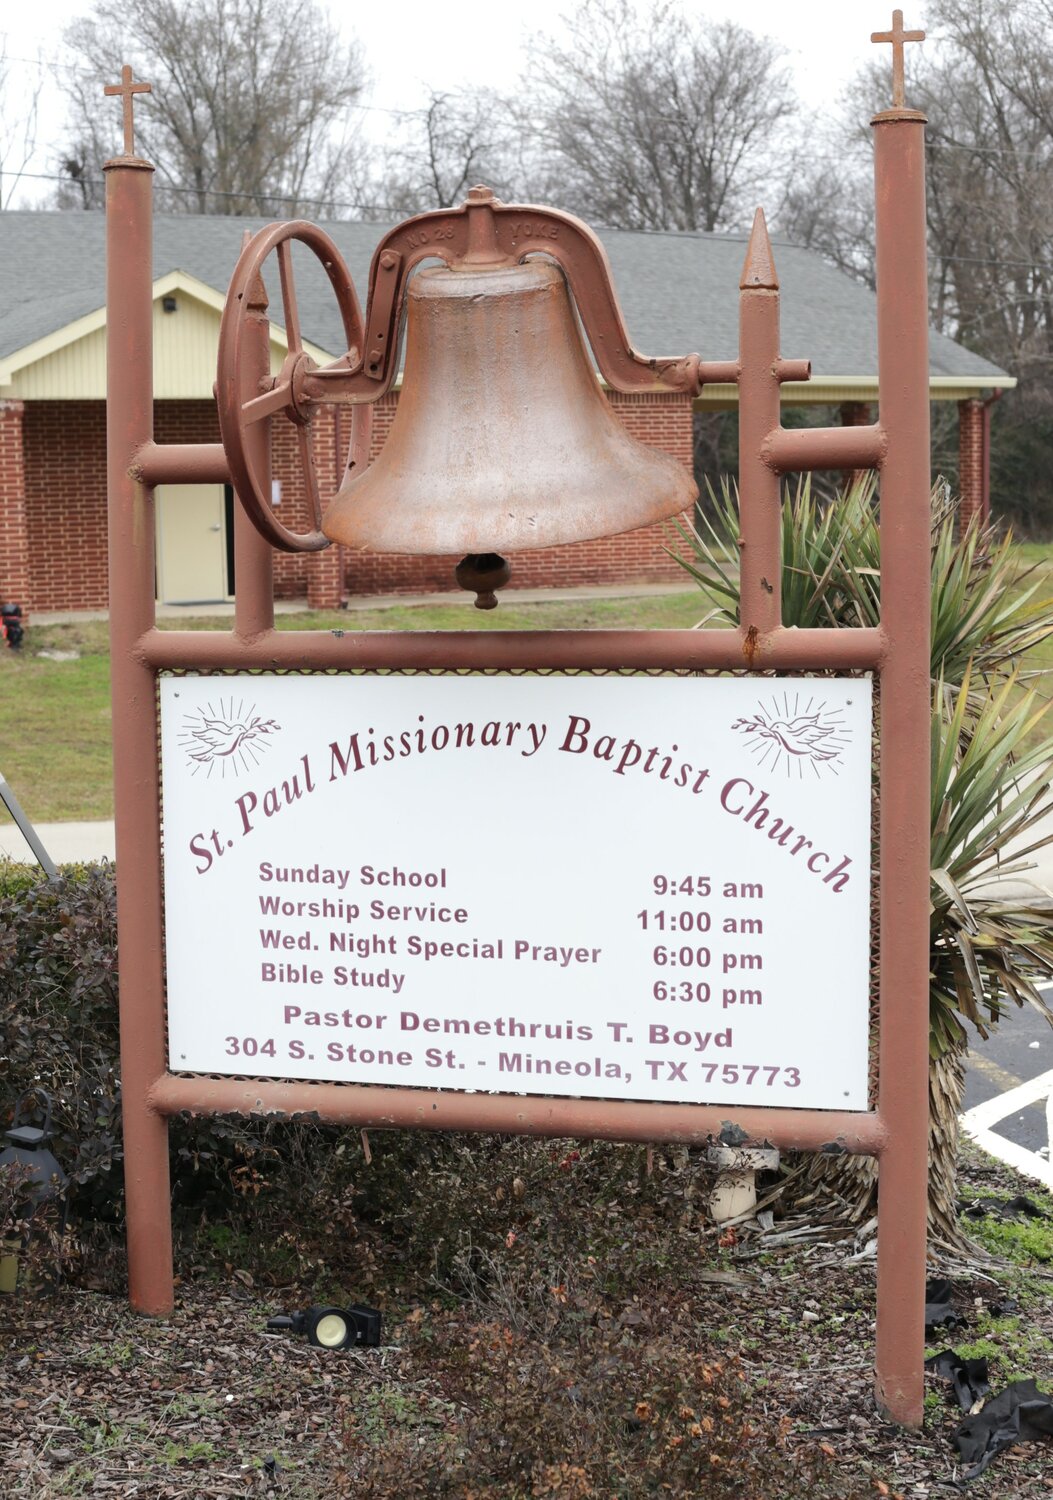 St. Paul Missionary Baptist Church has served as a beacon in Mineola for more than 150 years.